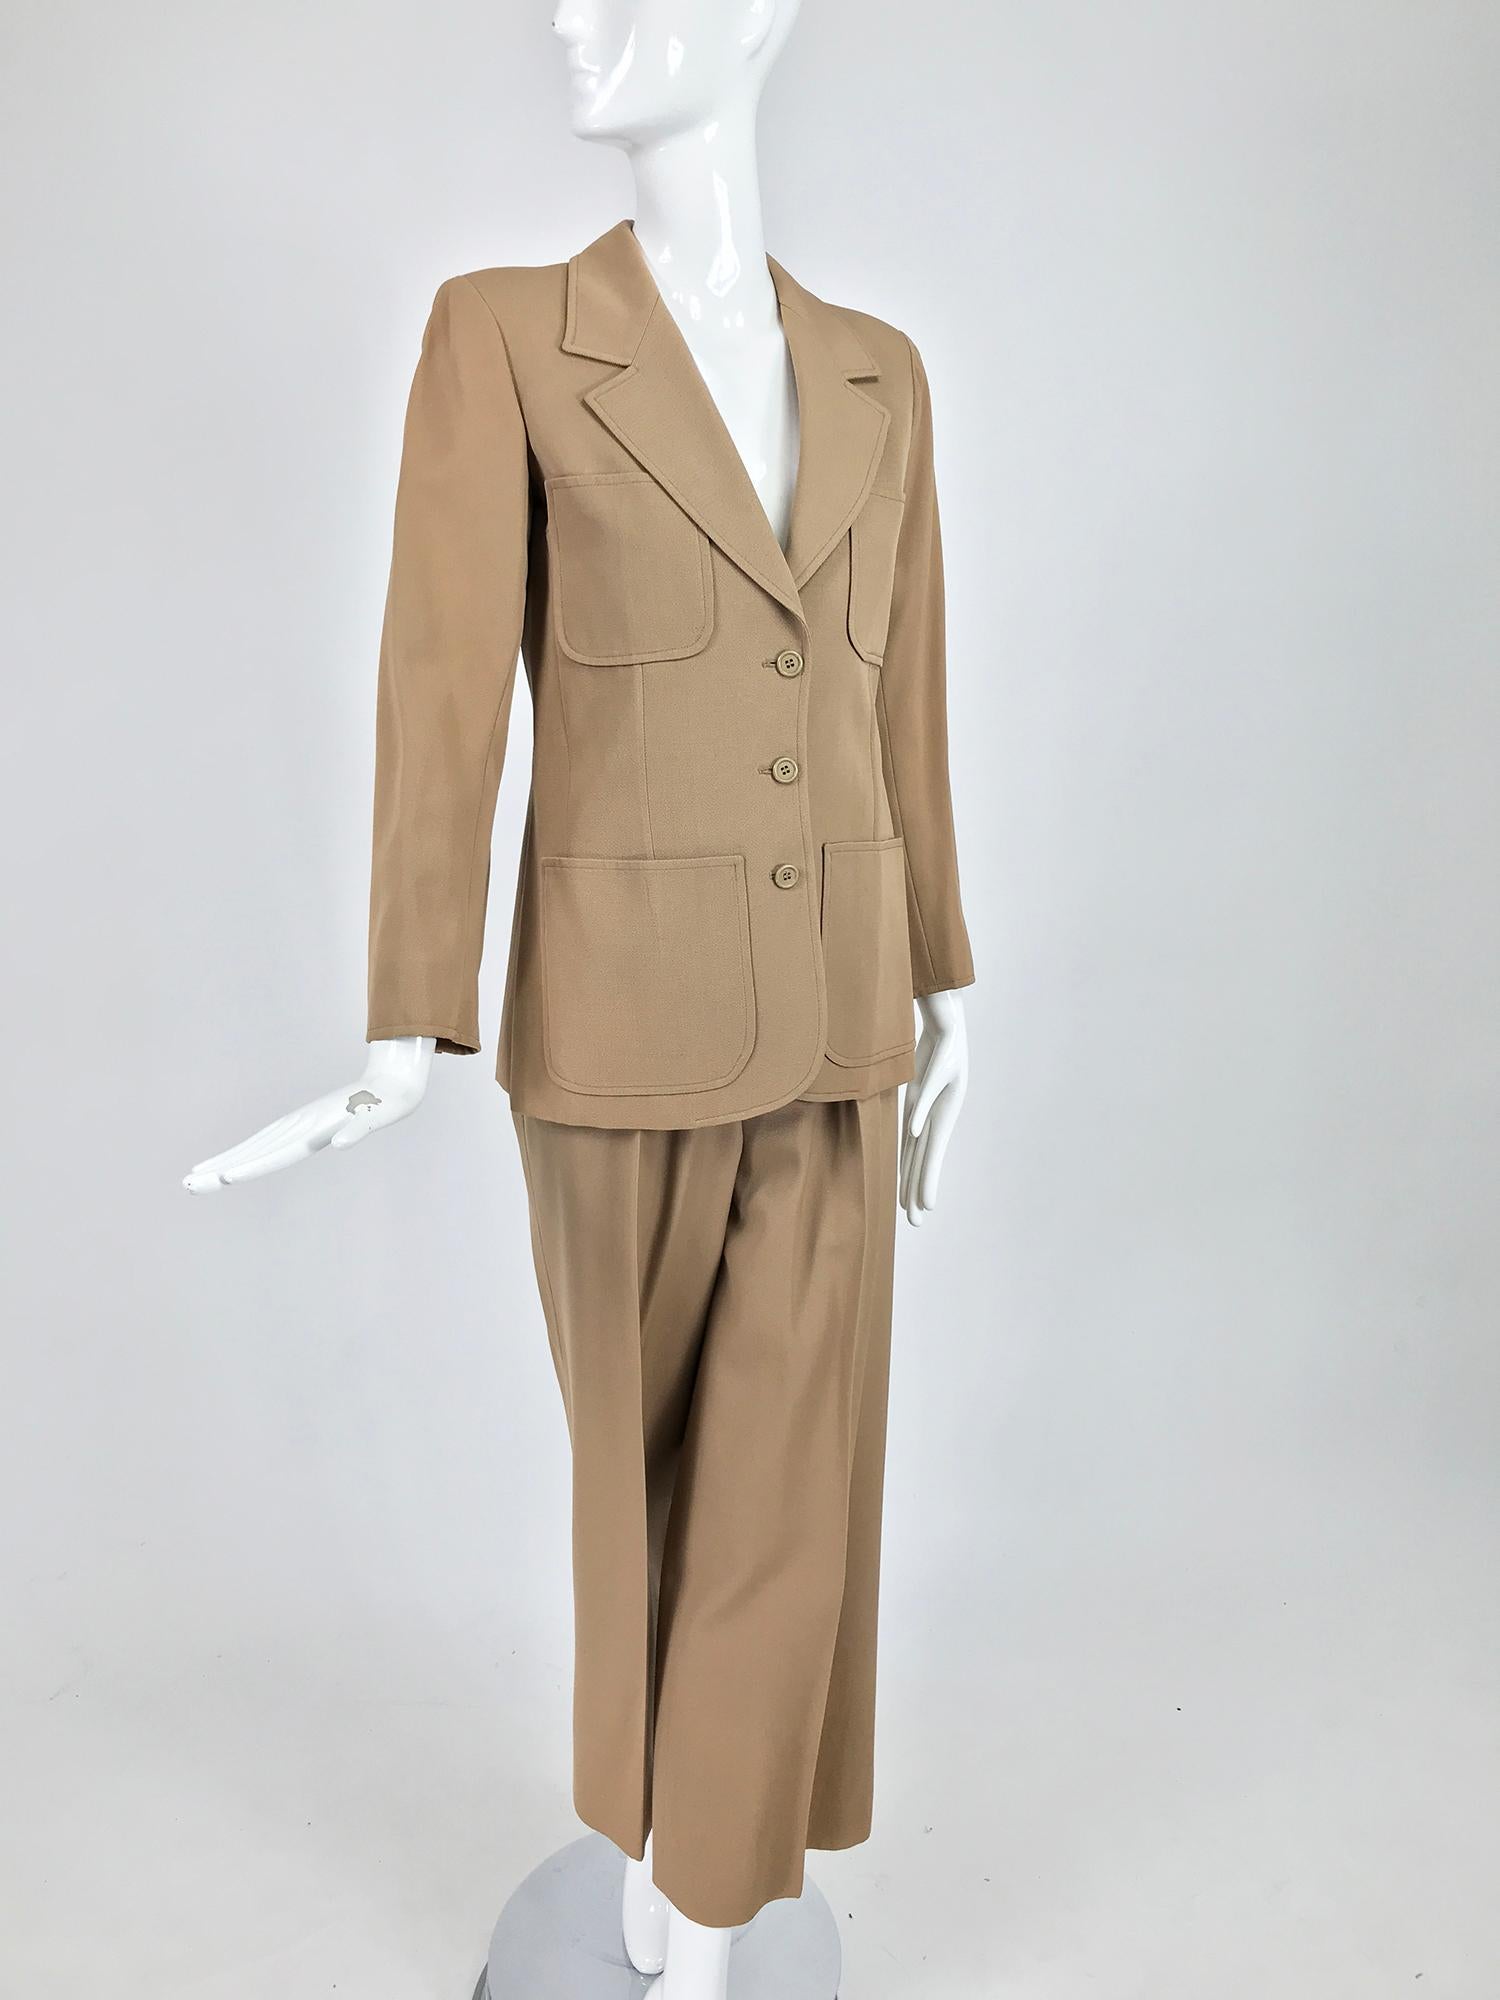 Yves Saint Laurent khaki tan wool twill 4 patch pocket pant suit from the 1970s. An early Rive Gauche pantsuit of flat wool twill, mid-light weight. The single breasted jacket closes at the front with buttons, there are 4 patch pockets, breast and